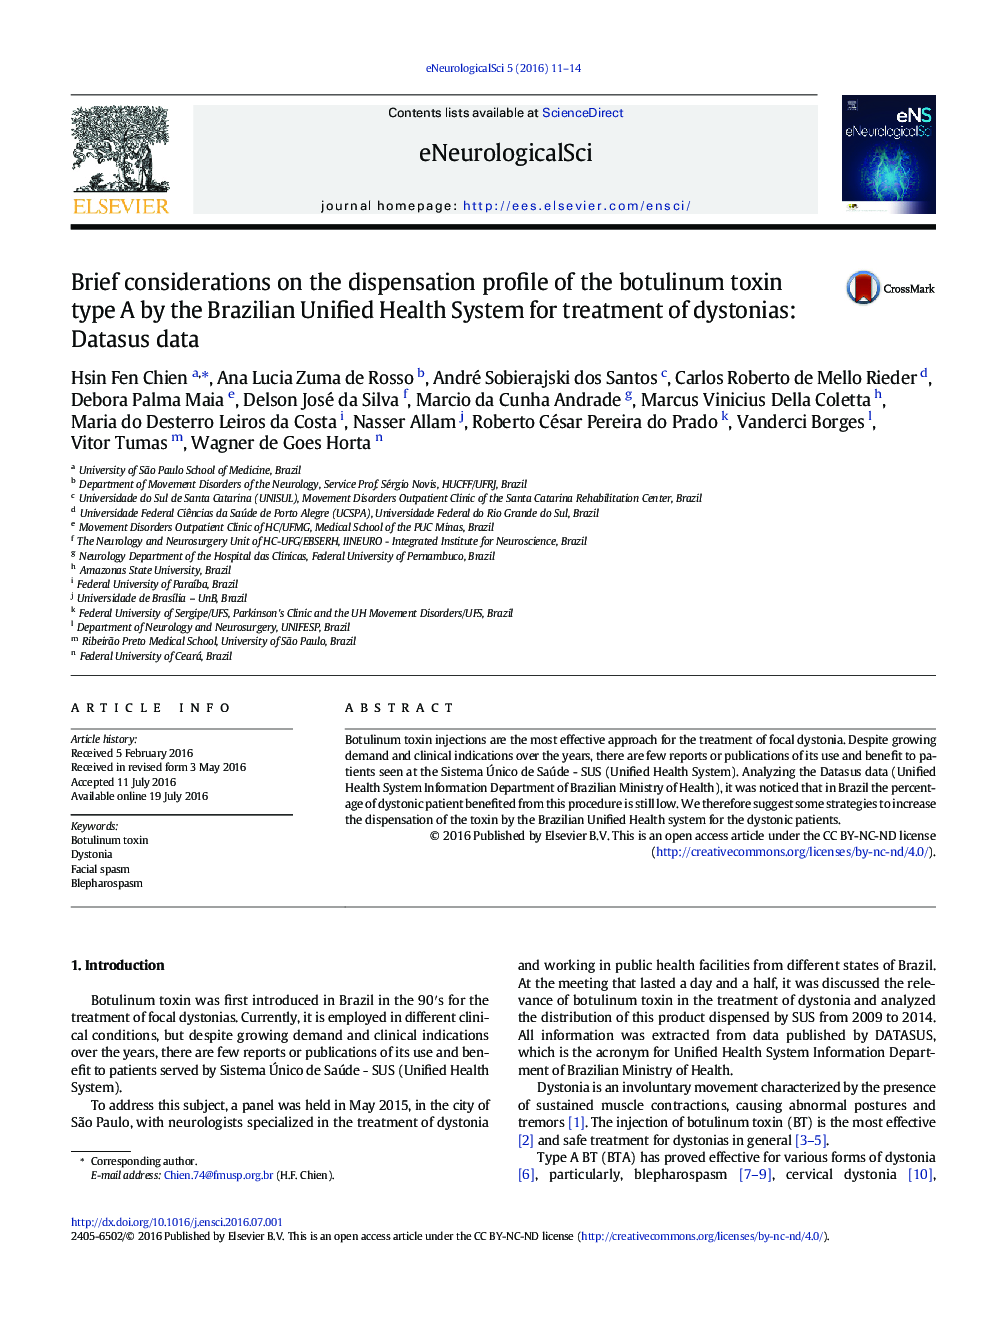 Brief considerations on the dispensation profile of the botulinum toxin type A by the Brazilian Unified Health System for treatment of dystonias: Datasus data